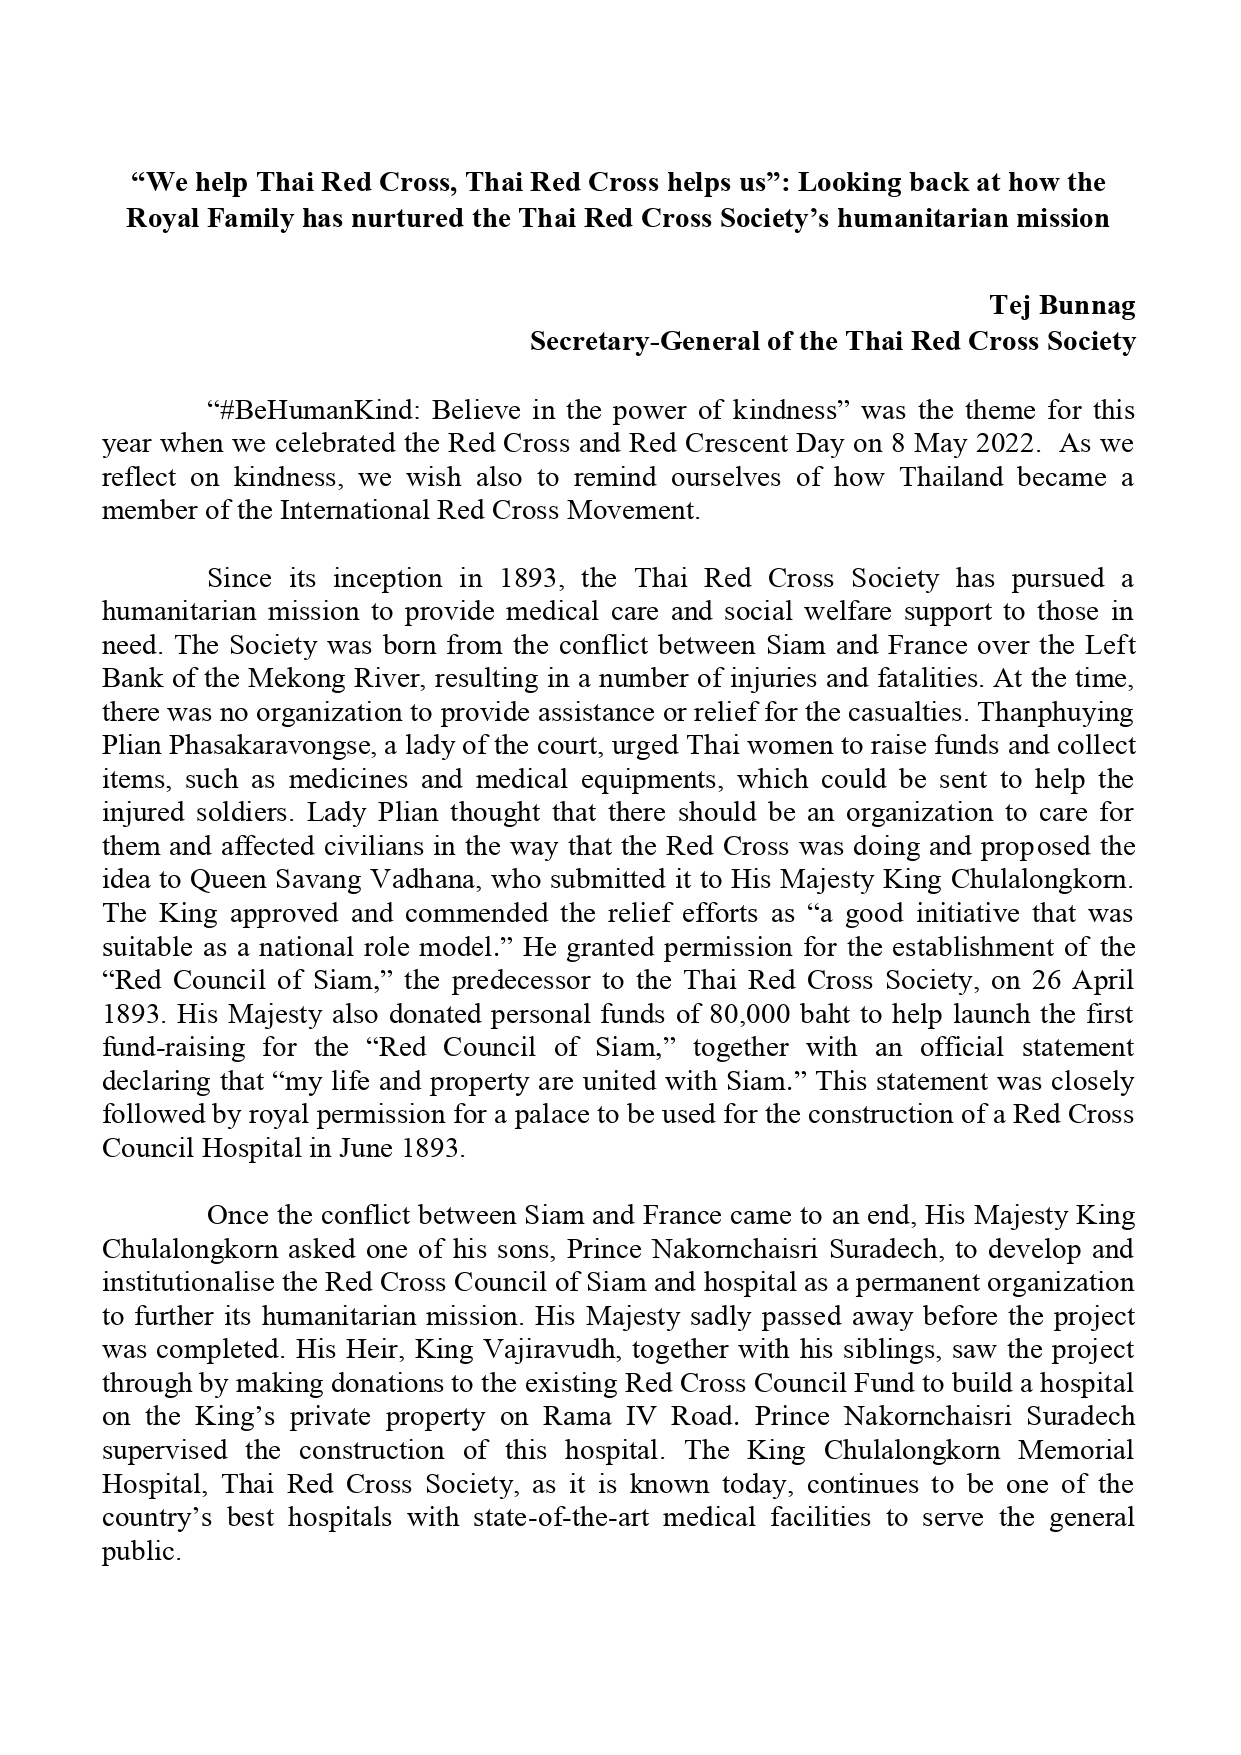 Thai_Red_Cross_article_page-0001